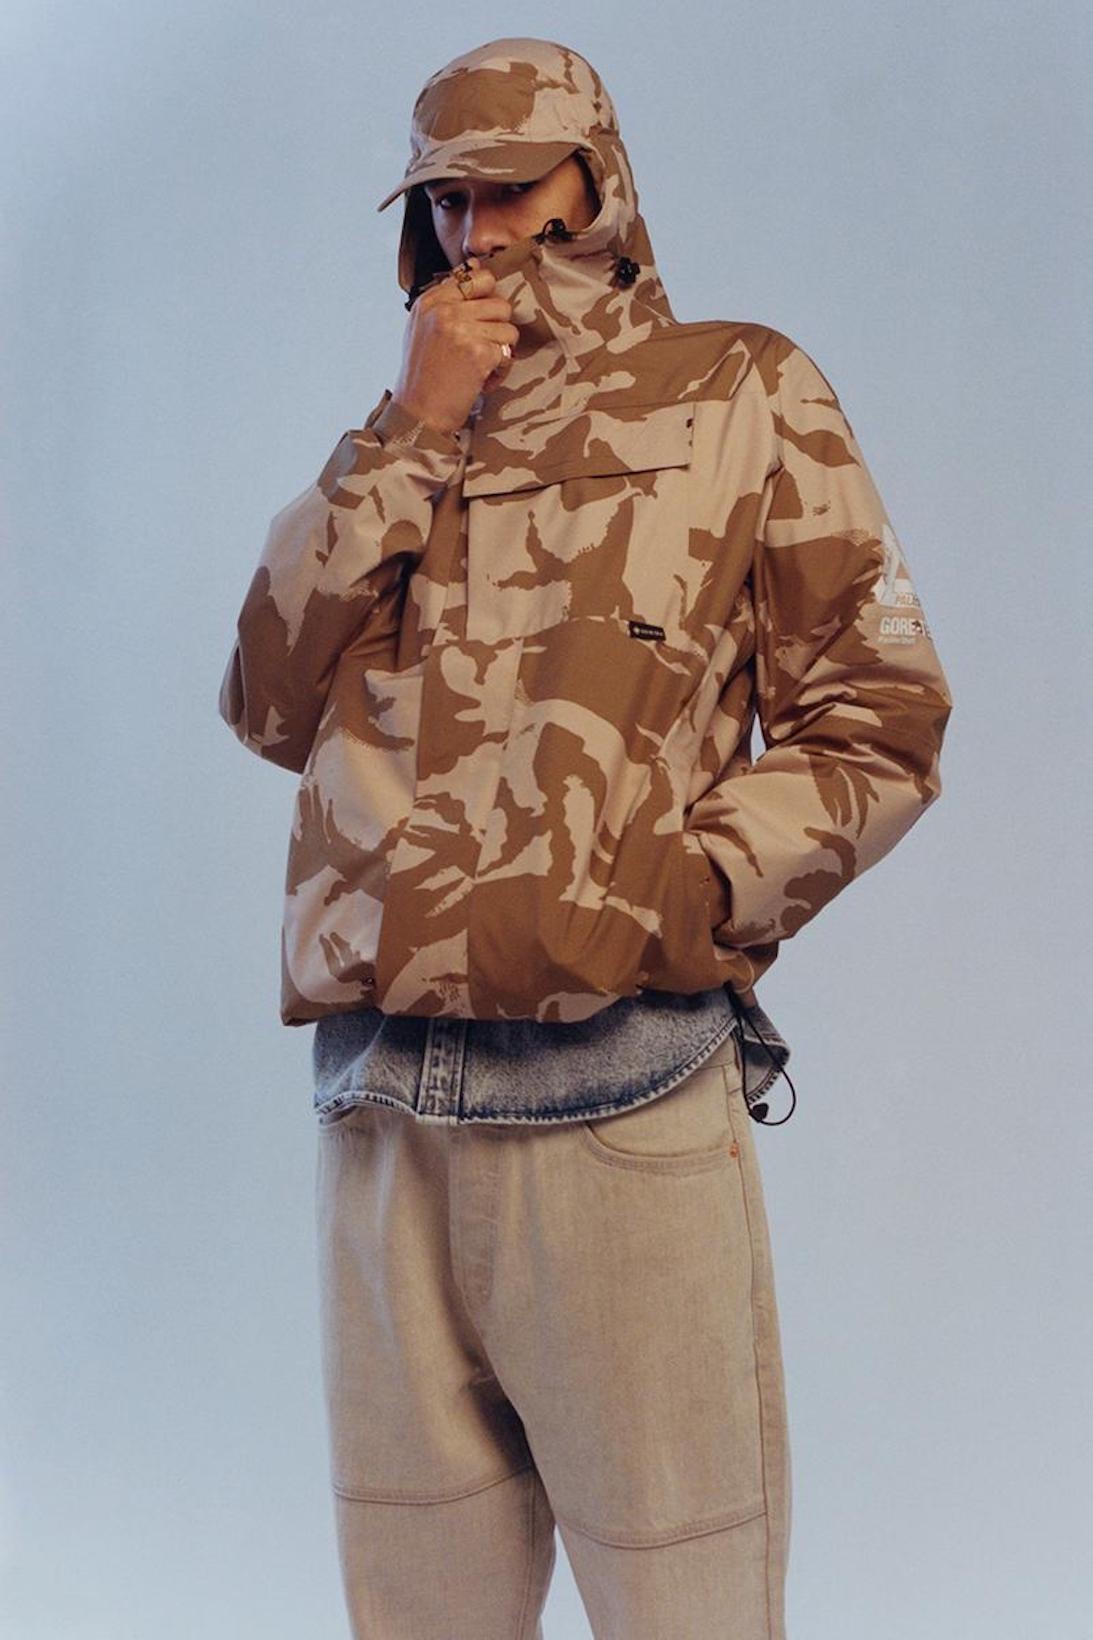 palace skateboards spring summer collection lookbook camo hat jacket outerwear pants brown